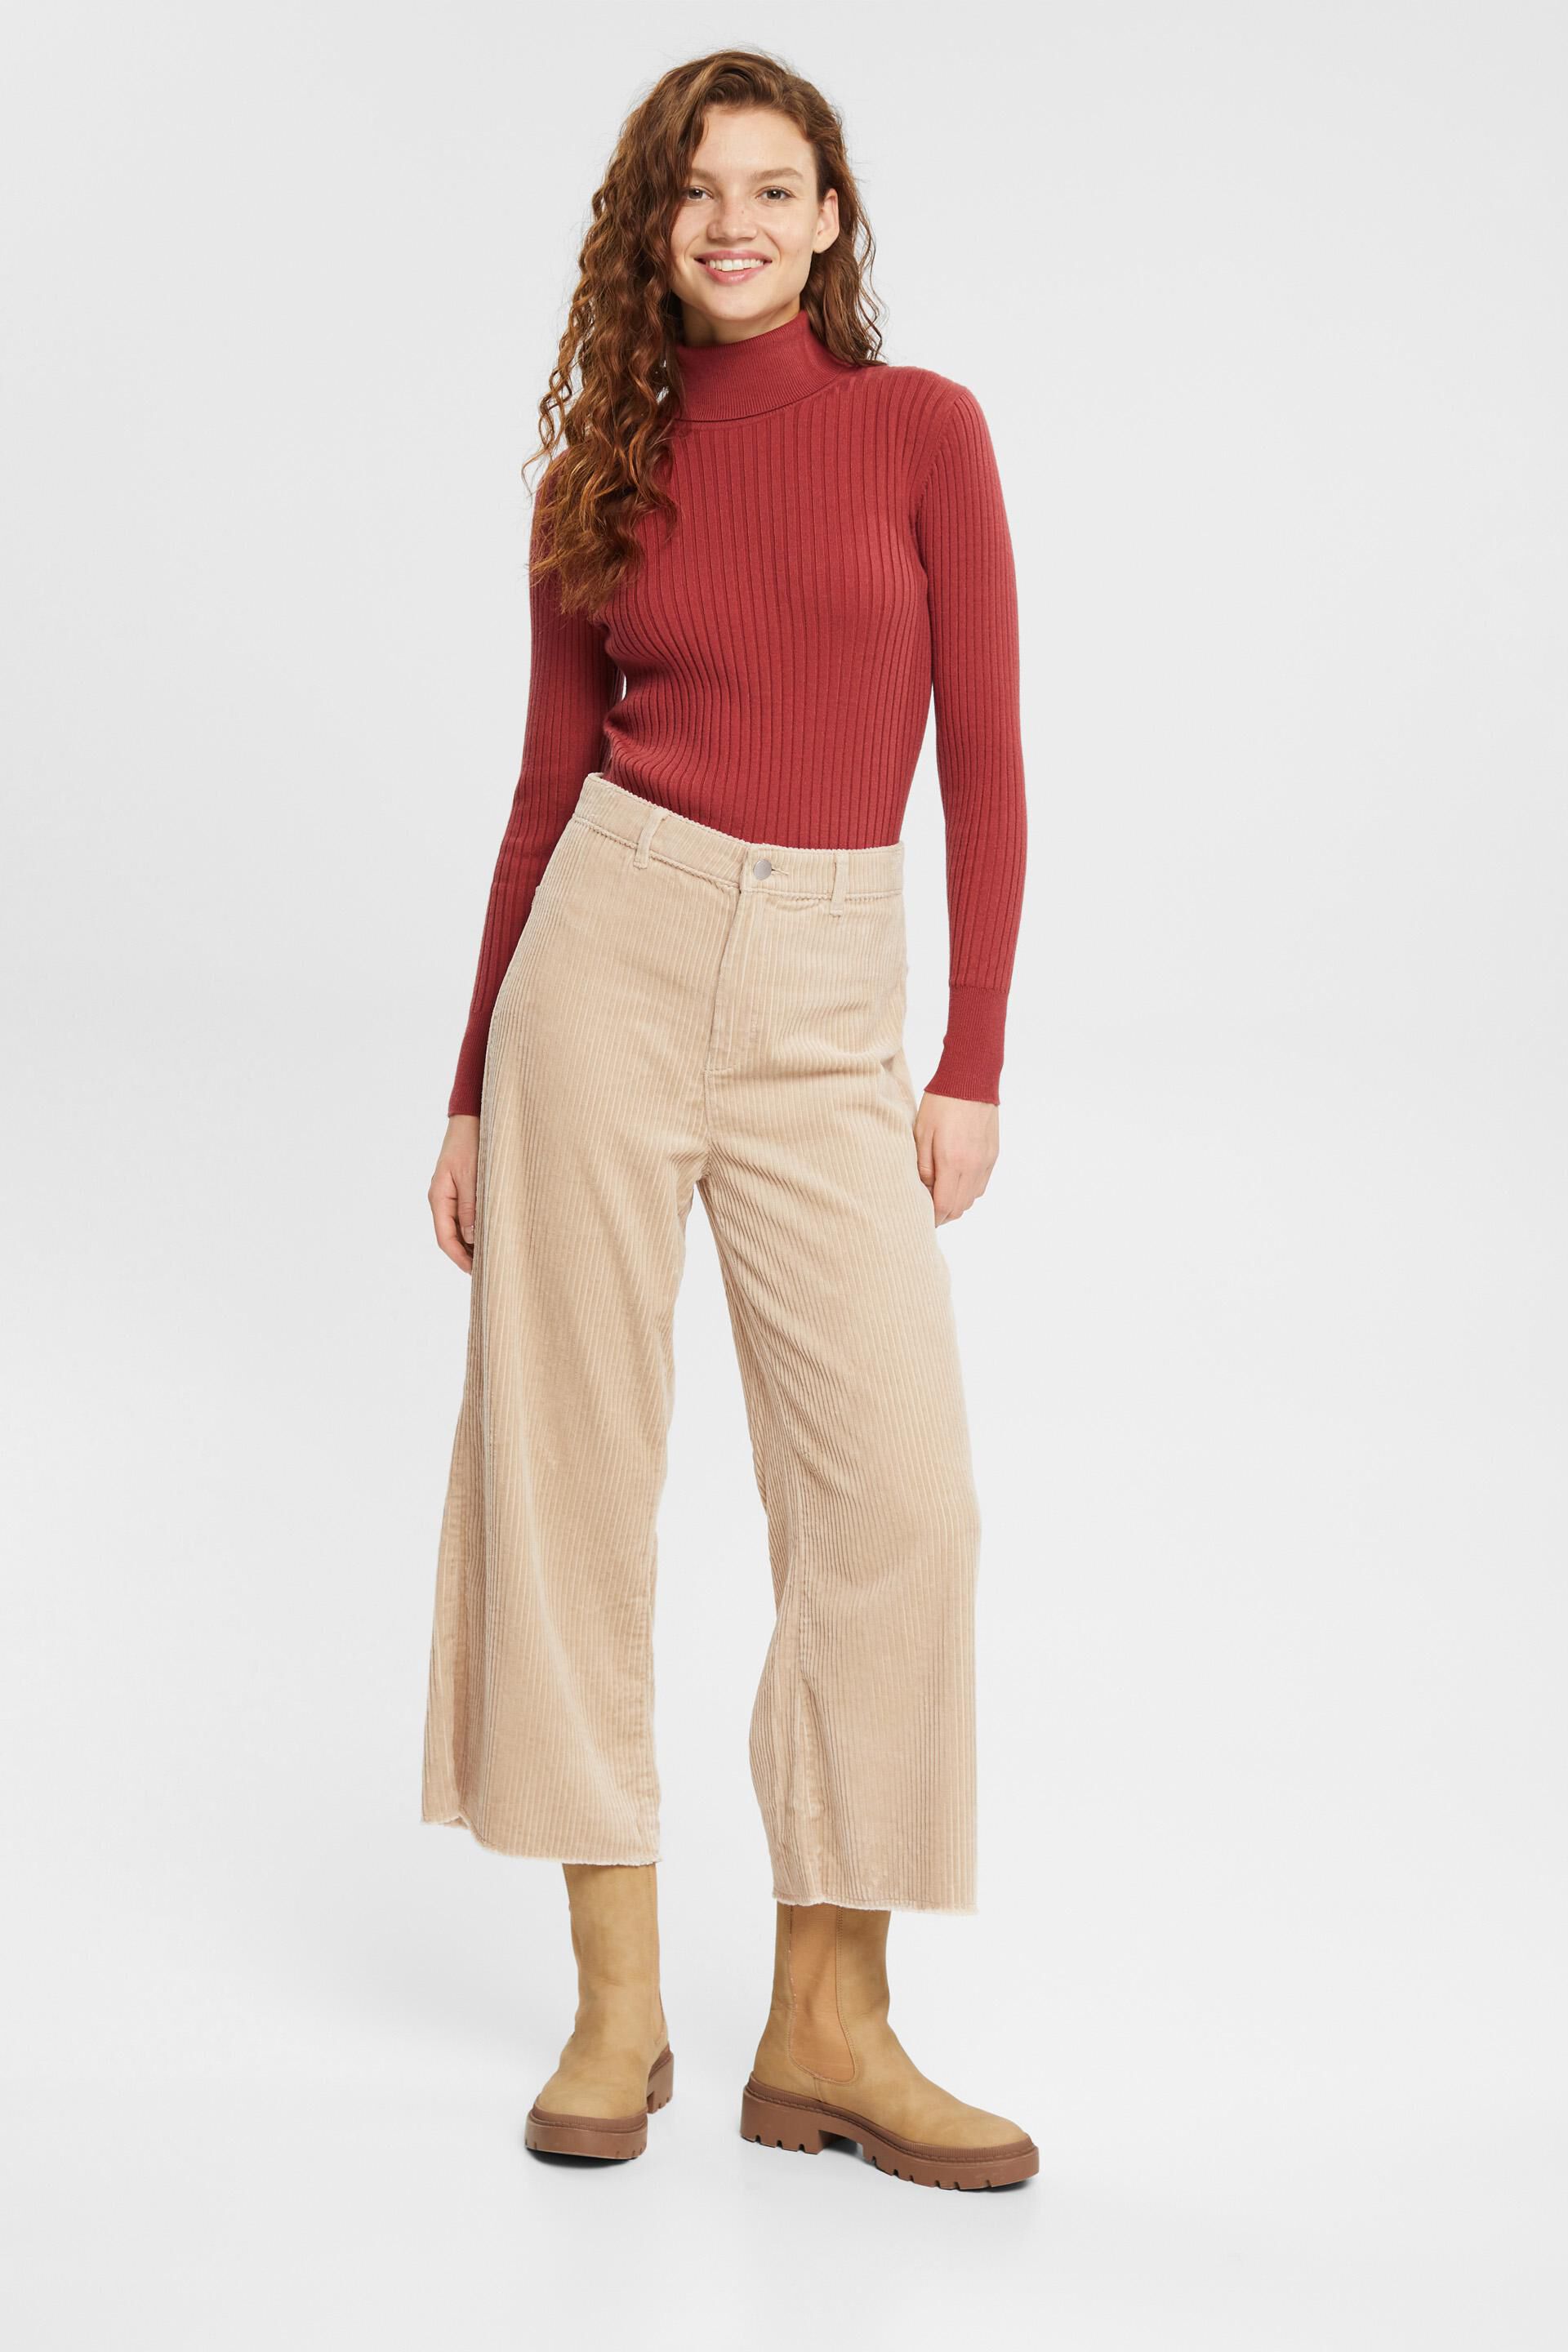 edc by Esprit HIGH RISE WIDE  Trousers  coral  Zalandocouk